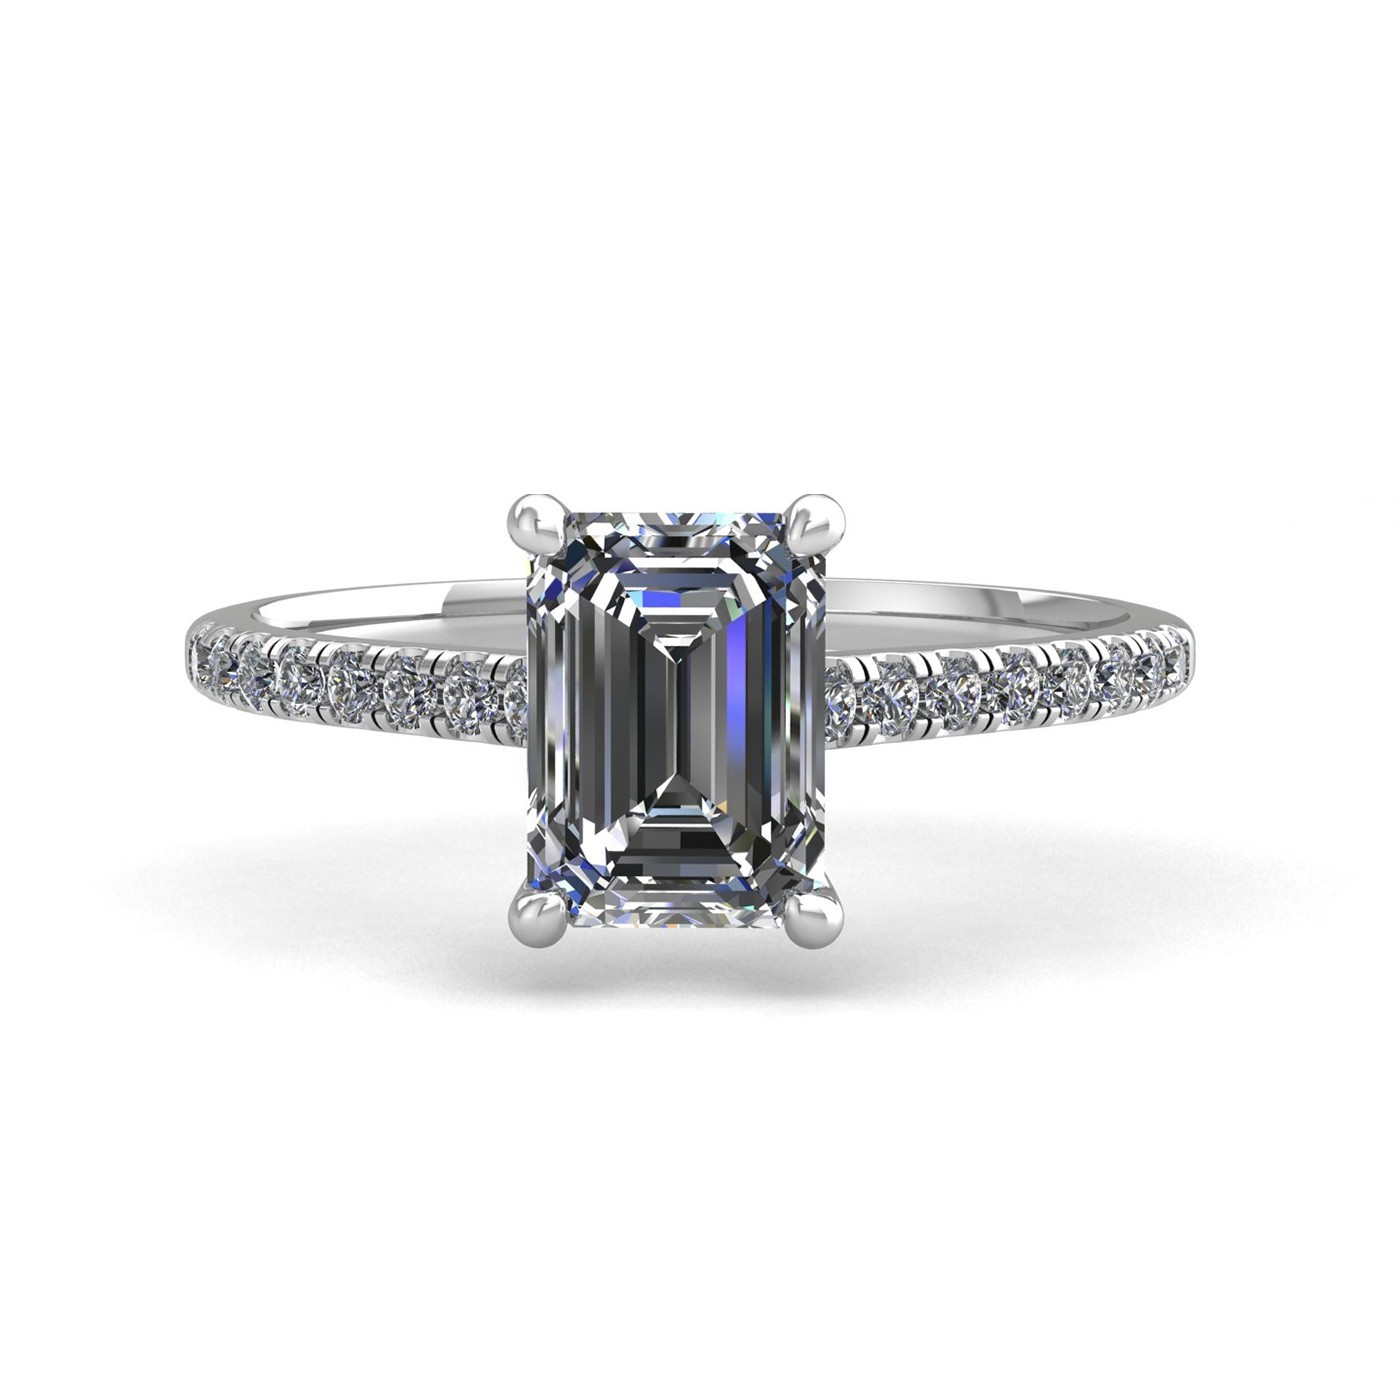 18k white gold 2.5ct 4 prongs emerald cut diamond engagement ring with whisper thin pavÉ set band Photos & images